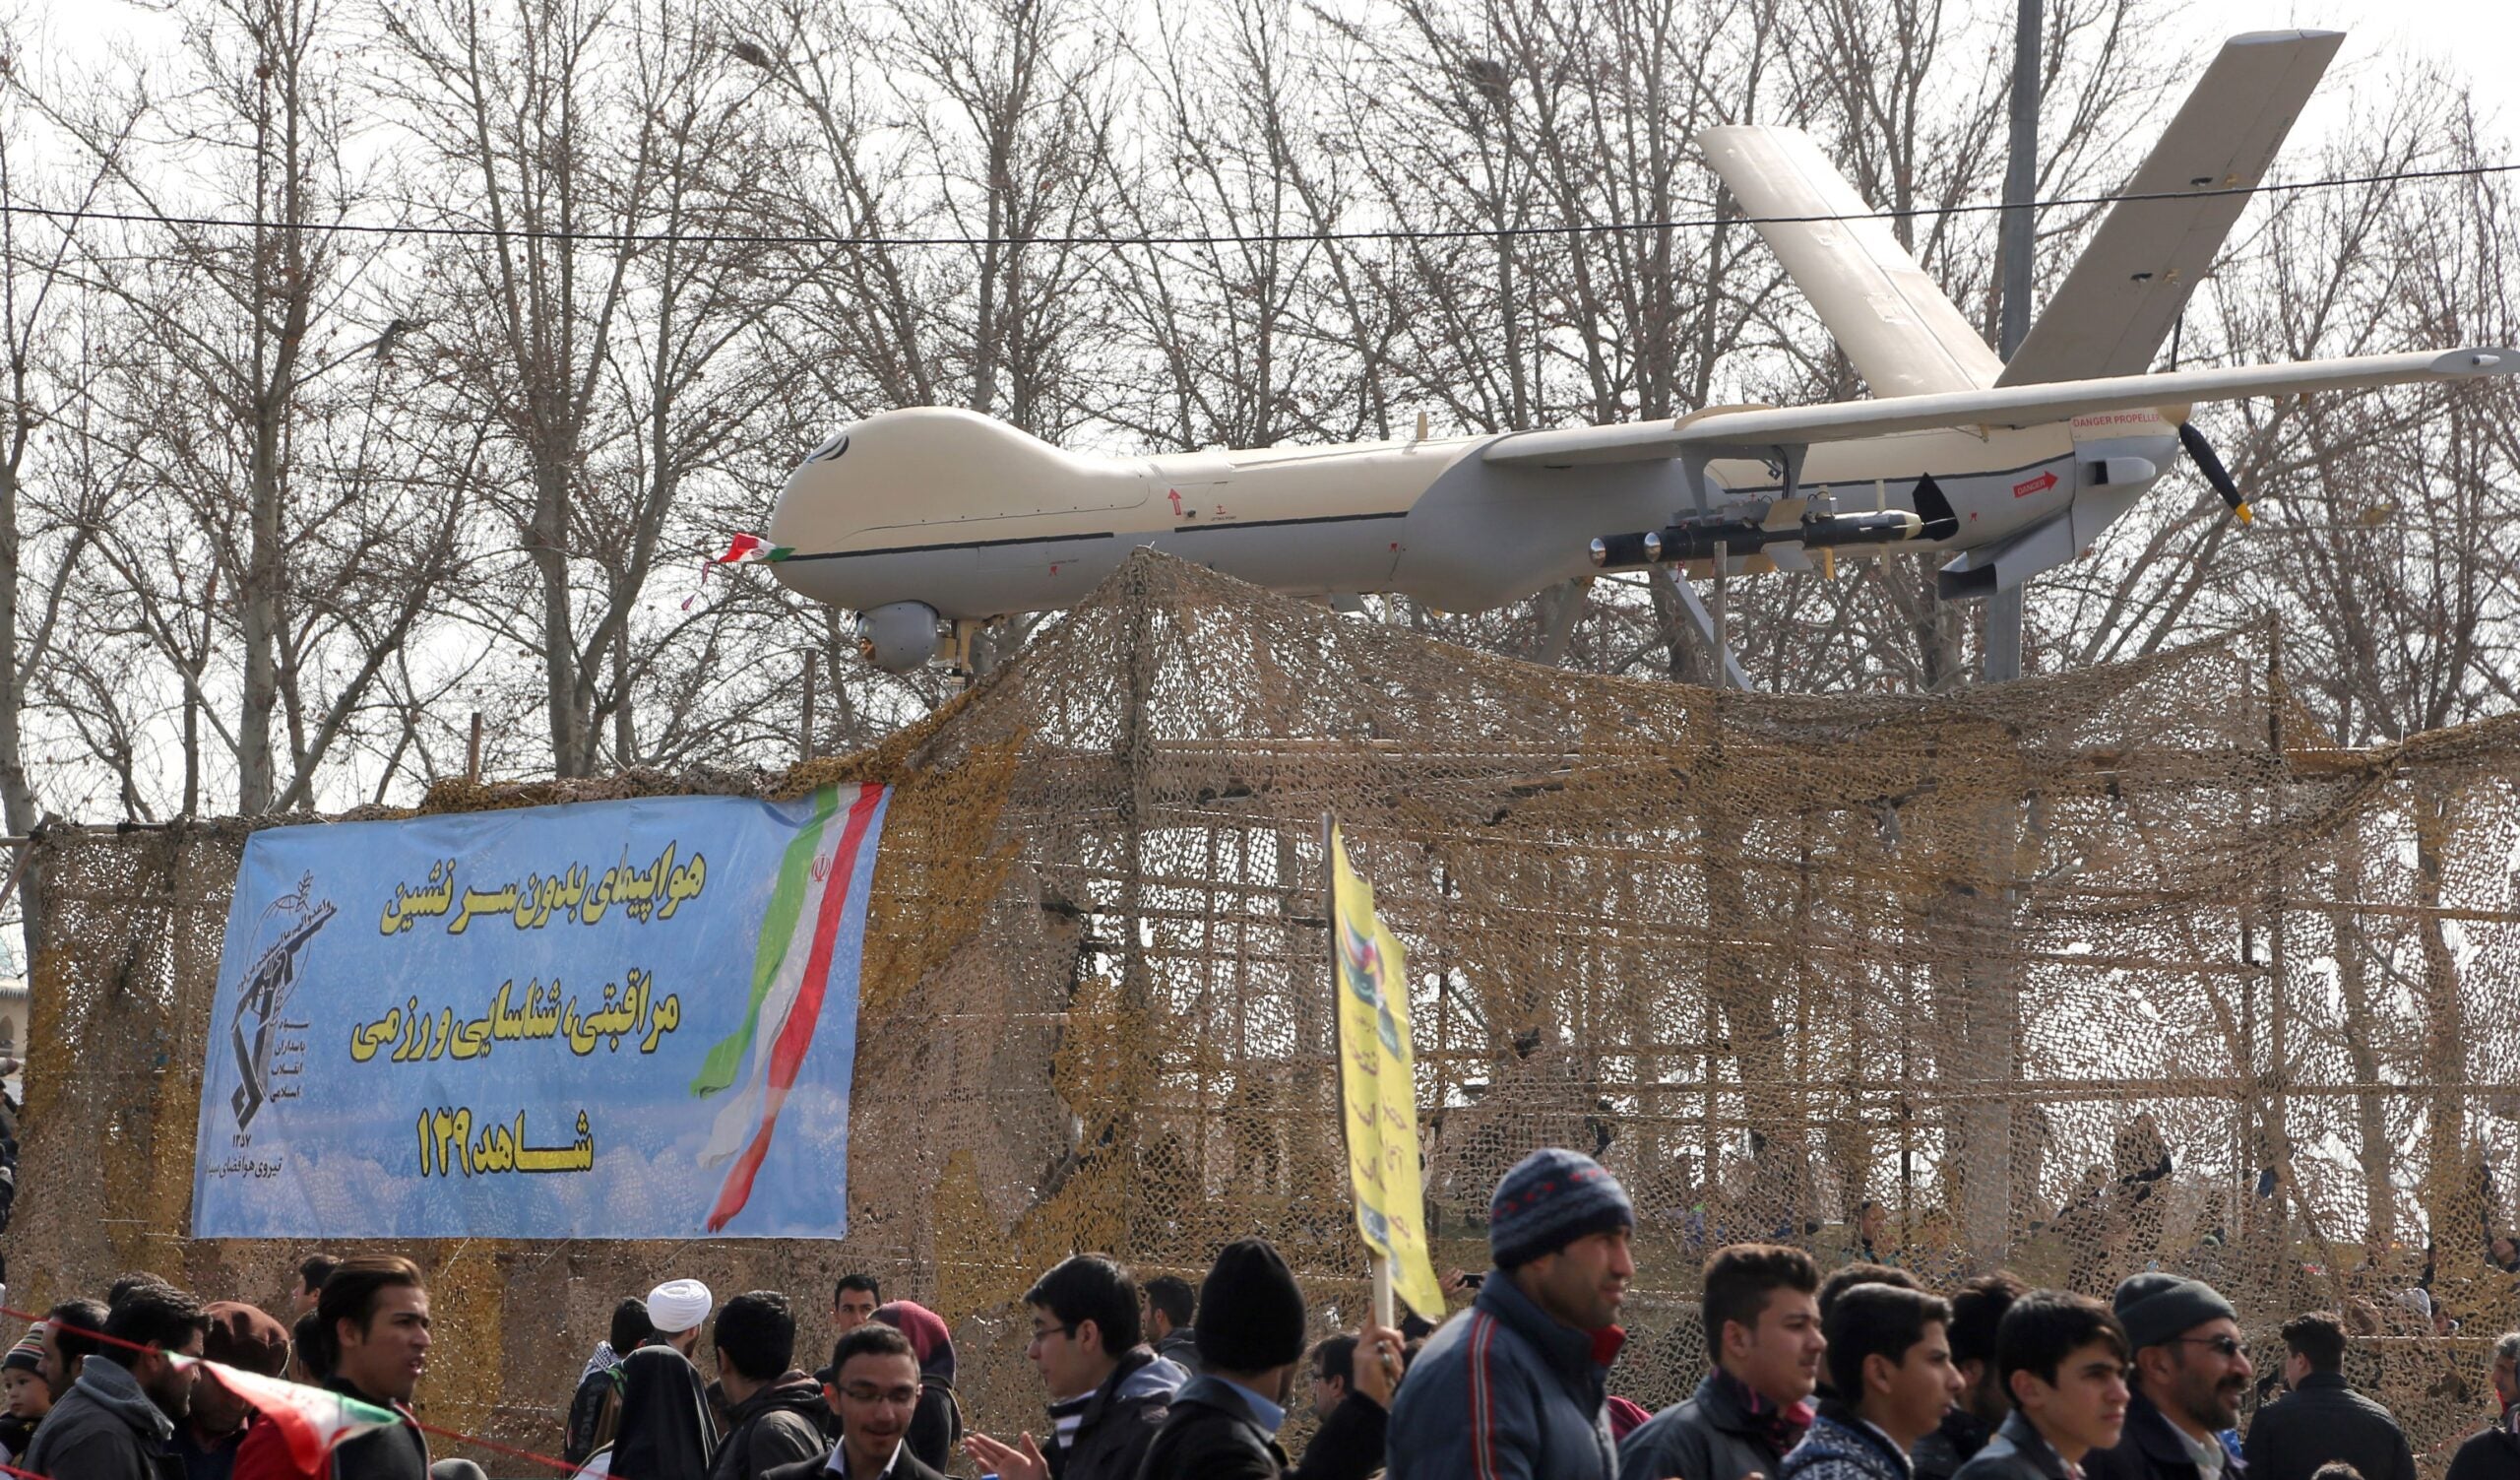 Iranians walk past Iran's Shahed 129 drone during celebrations in Tehran to mark the 37th anniversary of the Islamic revolution on February 11, 2016. Iranians waved "Death to America" banners and took selfies with a ballistic missile as they marked 37 years since the Islamic revolution, weeks after Iran finalised a nuclear deal with world powers. (Photo by ATTA KENARE / AFP) (Photo by ATTA KENARE/AFP via Getty Images)